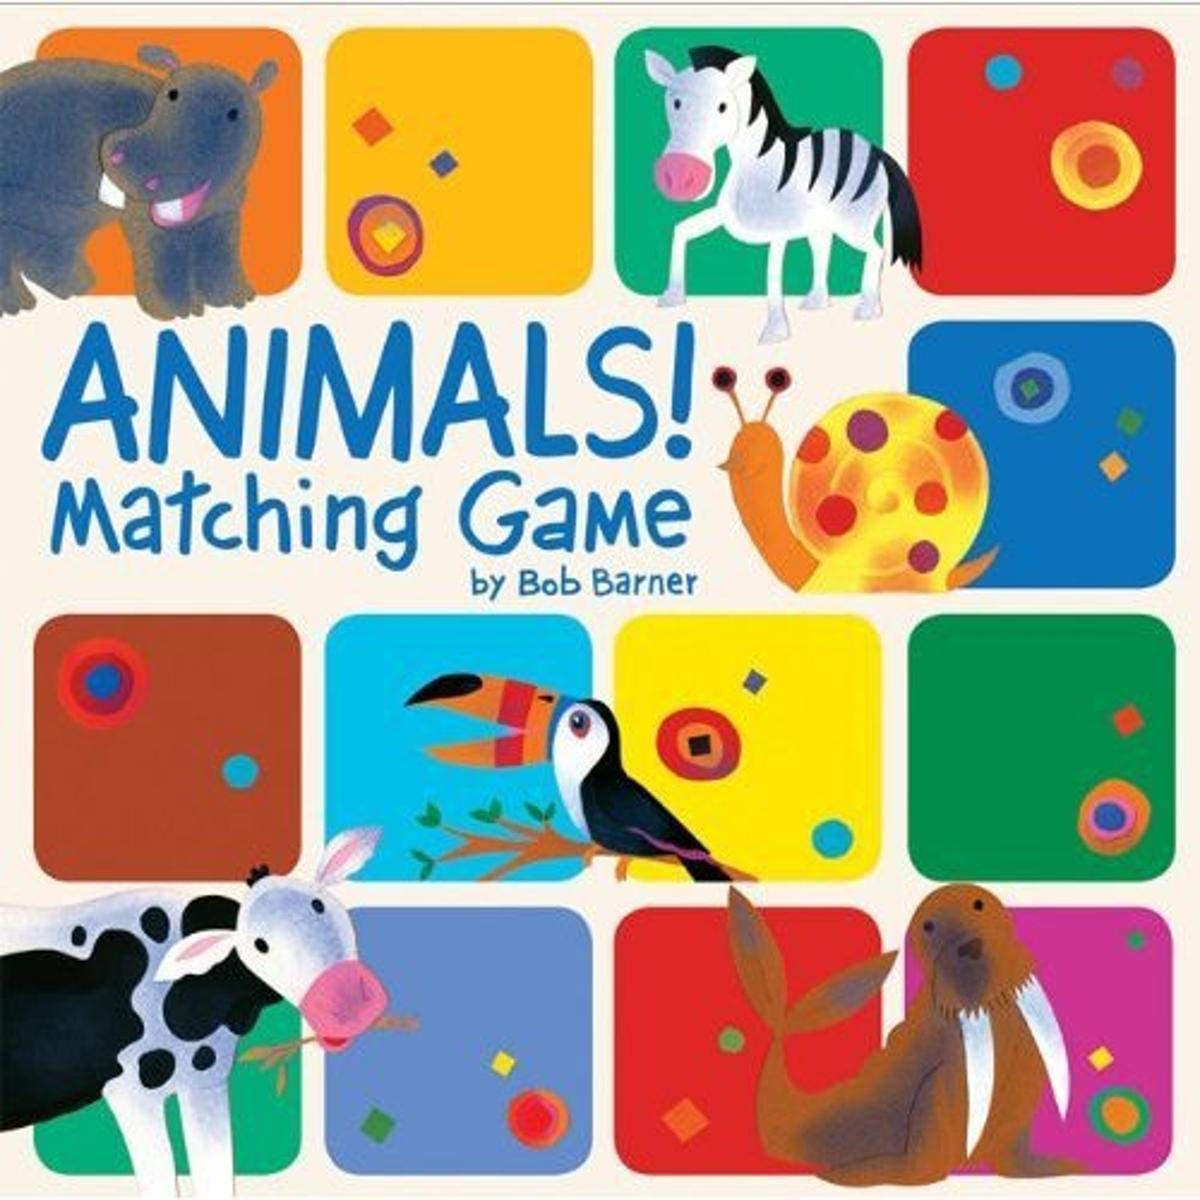 Animals! Matching Game - Twinkle Twinkle Little One